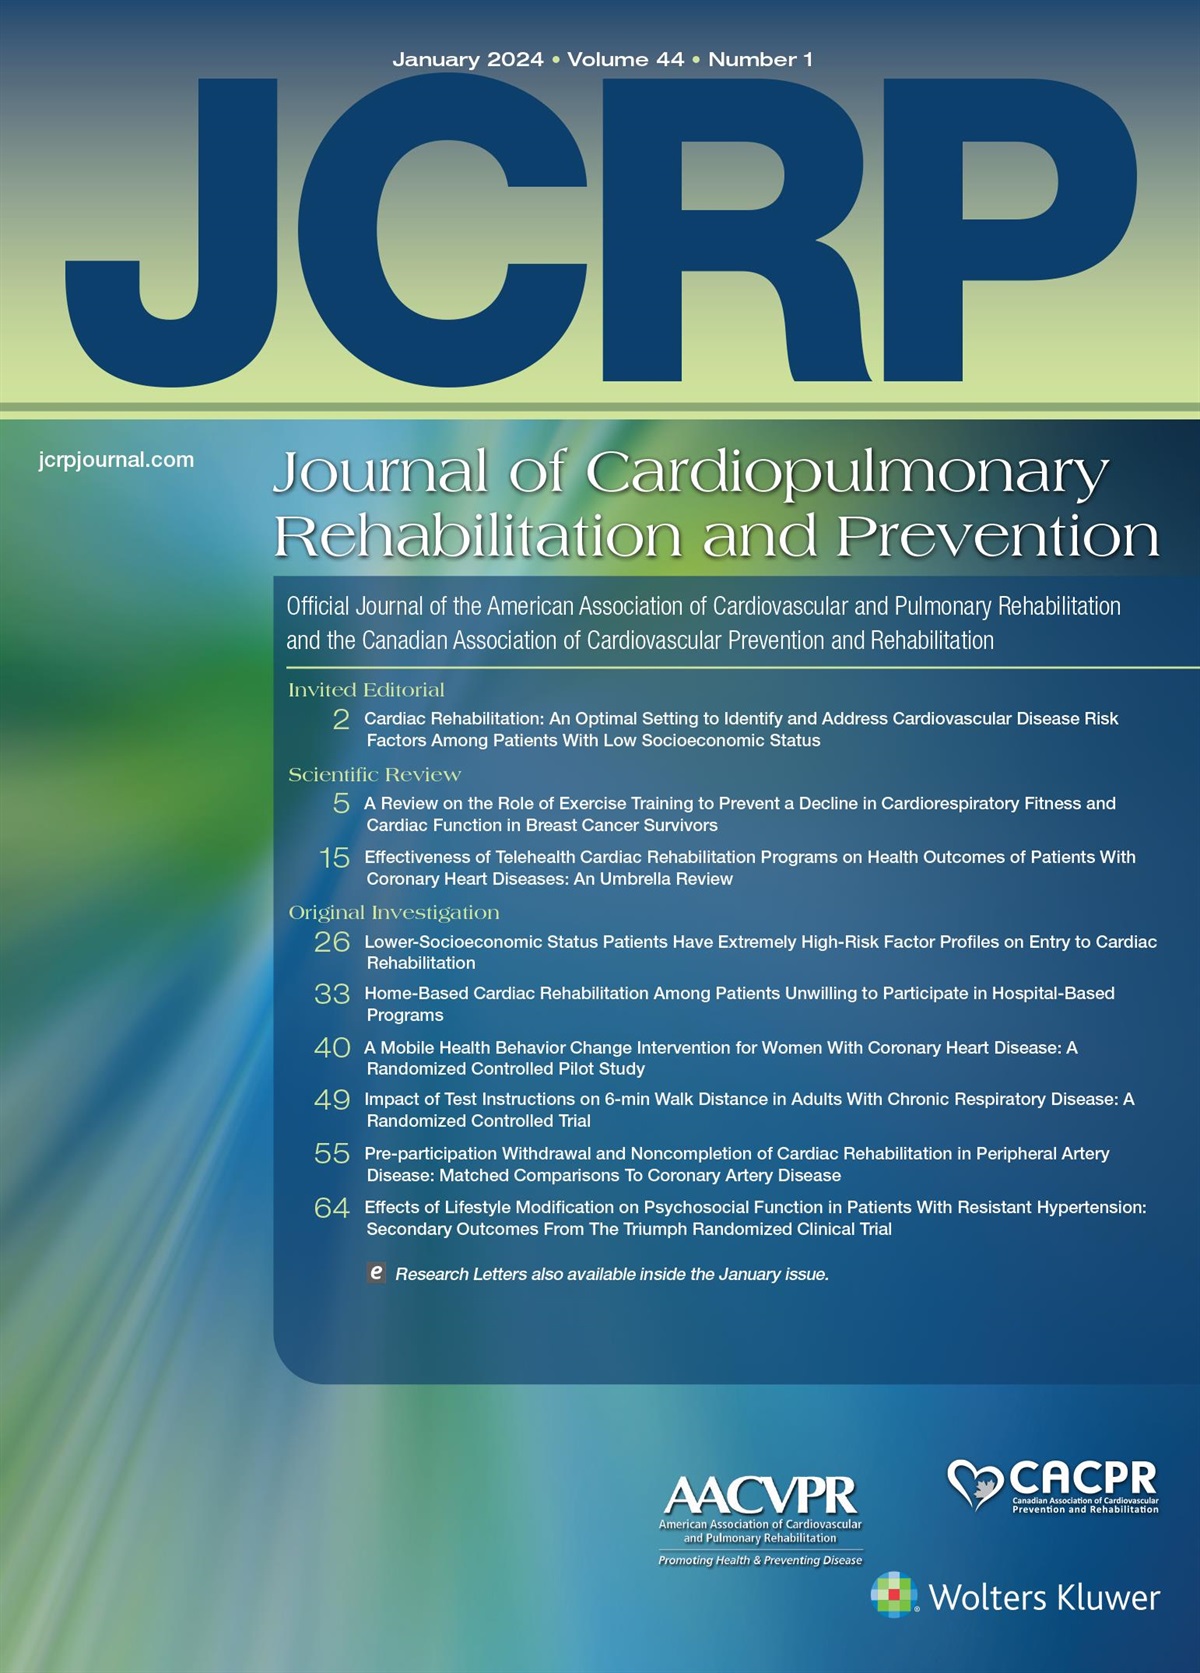 Year in Review: The Journal of Cardiopulmonary Rehabilitation and Prevention: Erratum